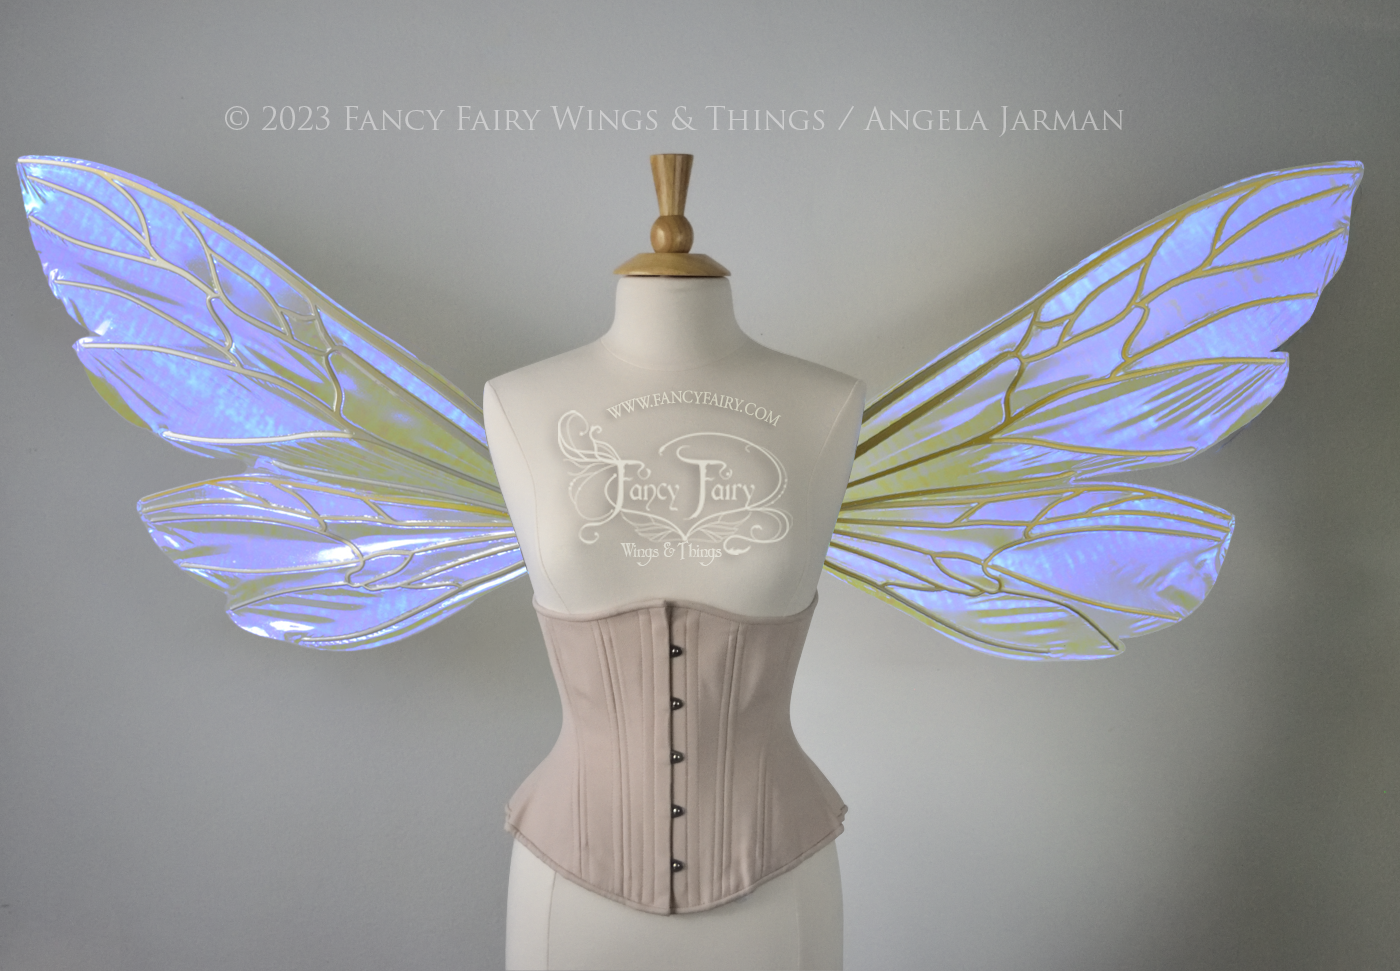 Front view of an ivory dress form wearing an alabaster underbust corset and large fairy wings similar to wasp wings, upper and lower panels are both elongated with rounded and slightly pointed tips. They are iridescent violet / blue, with gold veins. The background is plain white and my logo and copyright notice are visible.